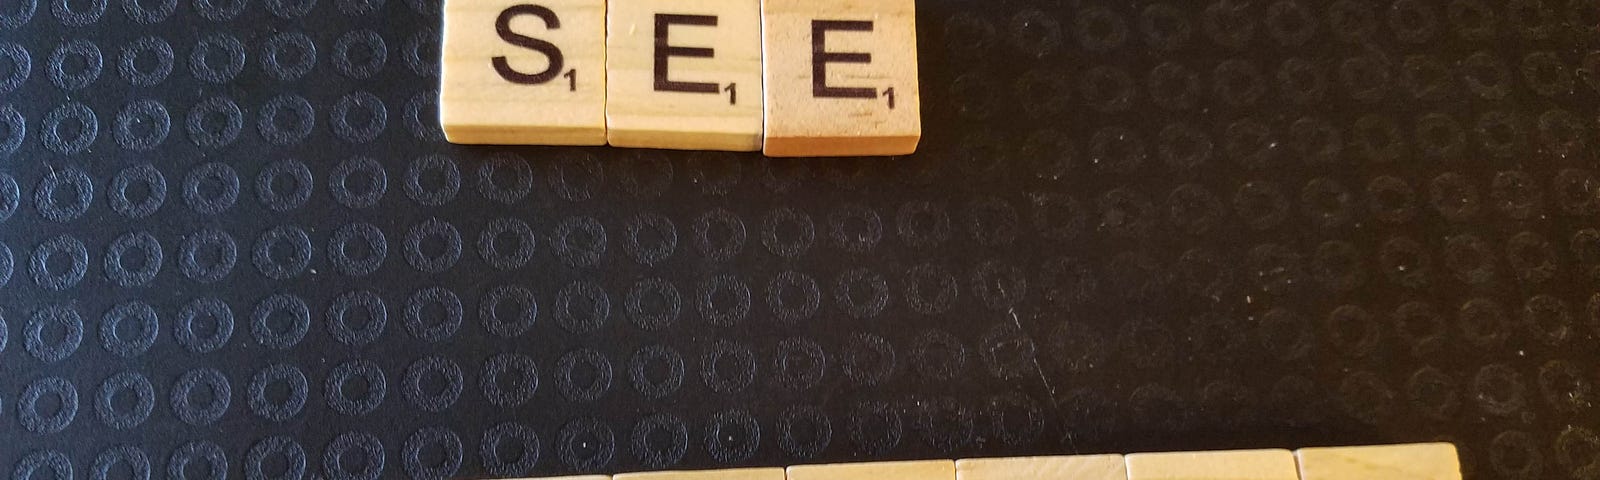 wooden tiles spelling out “see yourself”